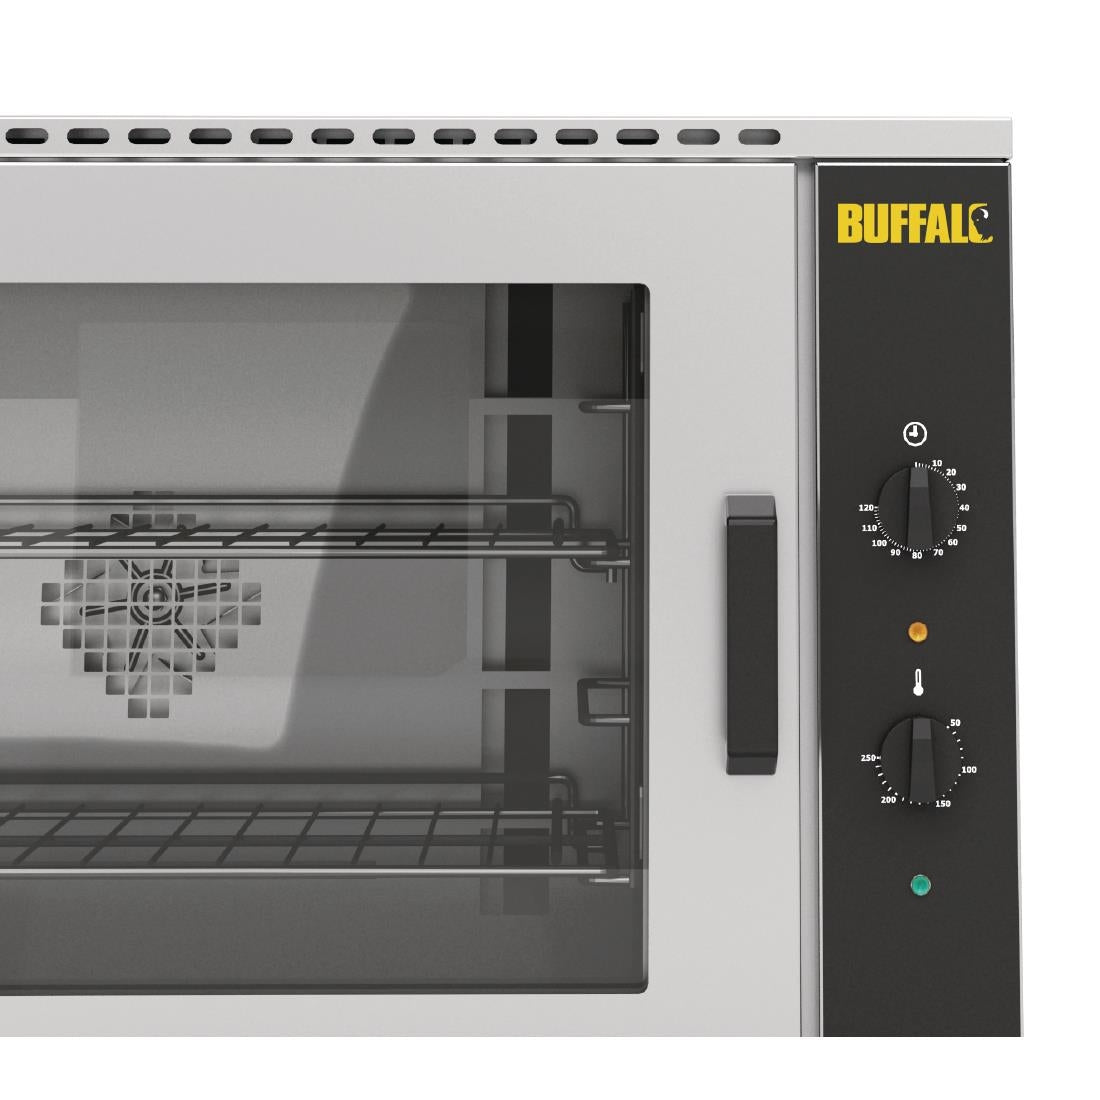 CW864 Buffalo Convection Oven 100Ltr JD Catering Equipment Solutions Ltd